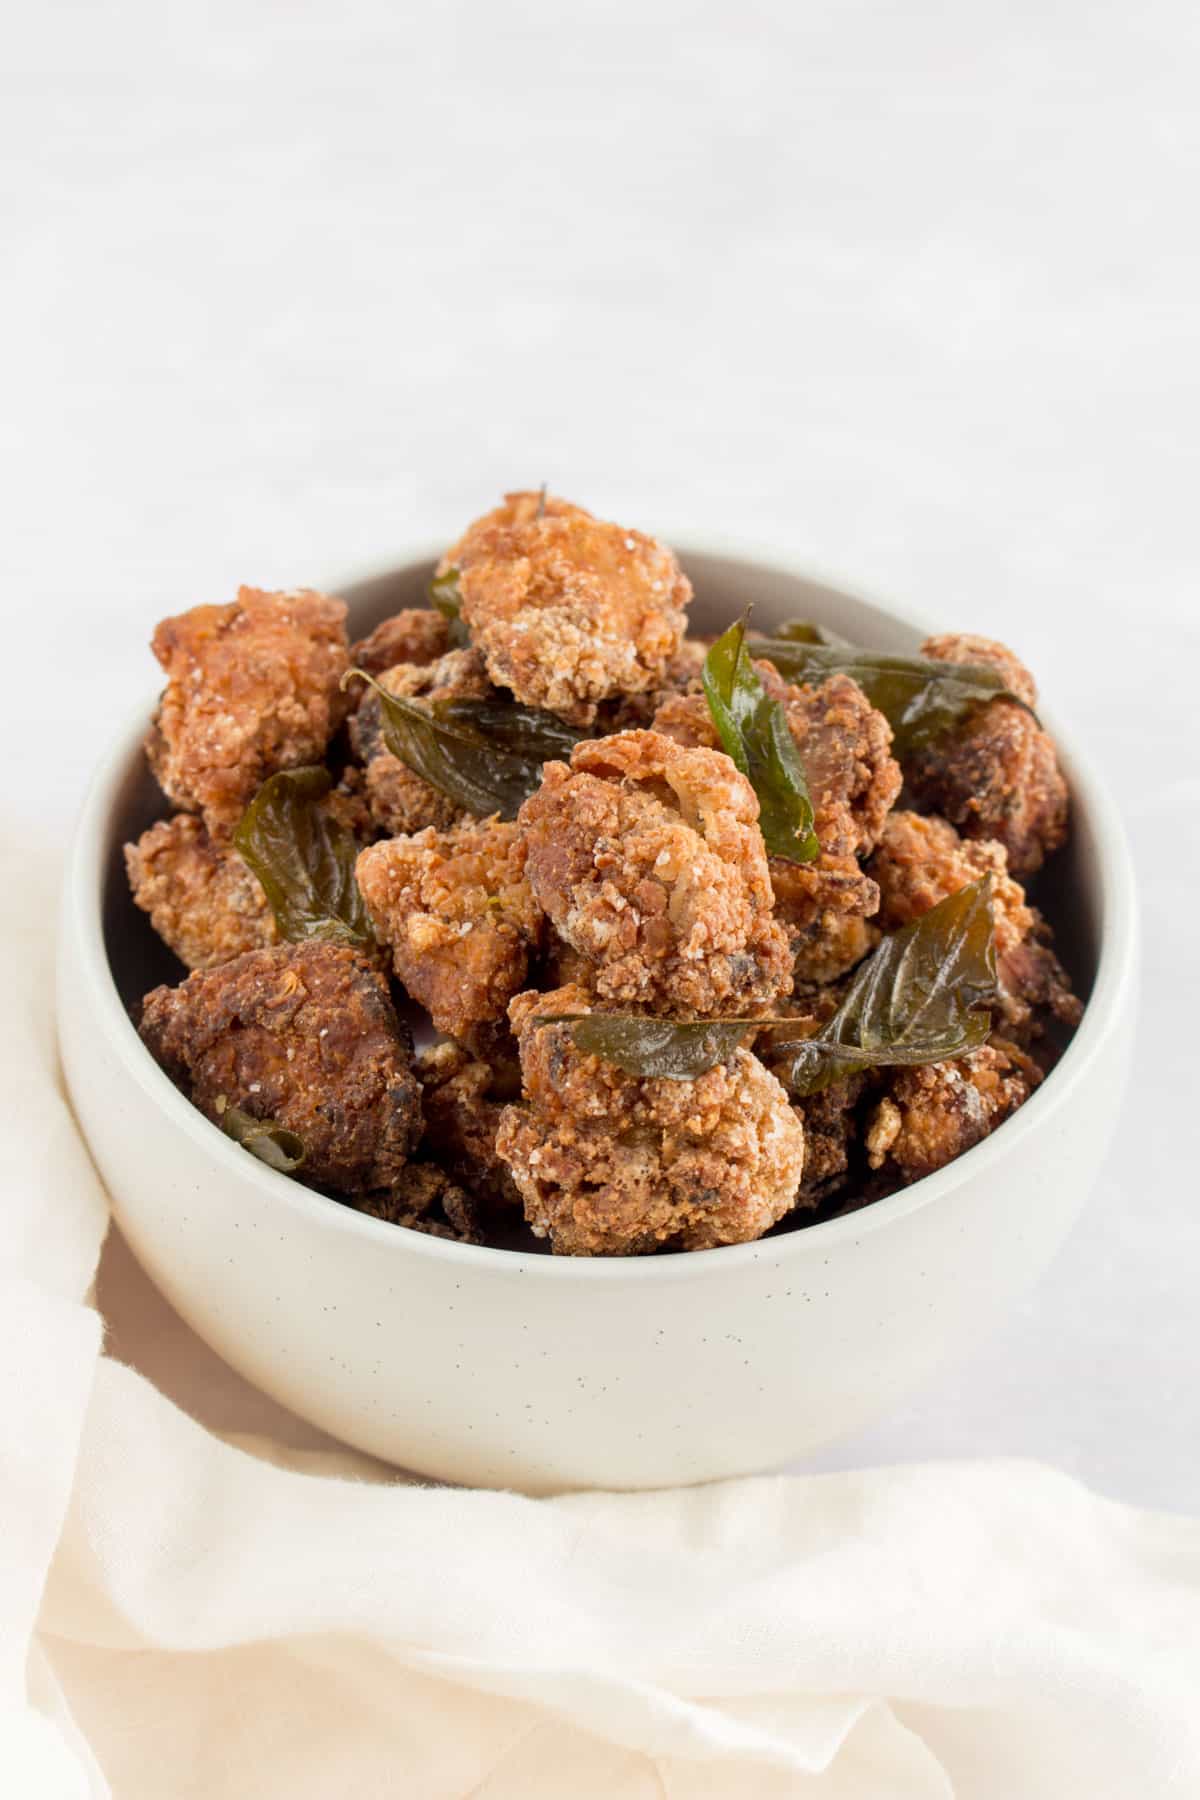 Angled image of a white bowl with Taiwanese Fried Chicken and fried Thai basil.